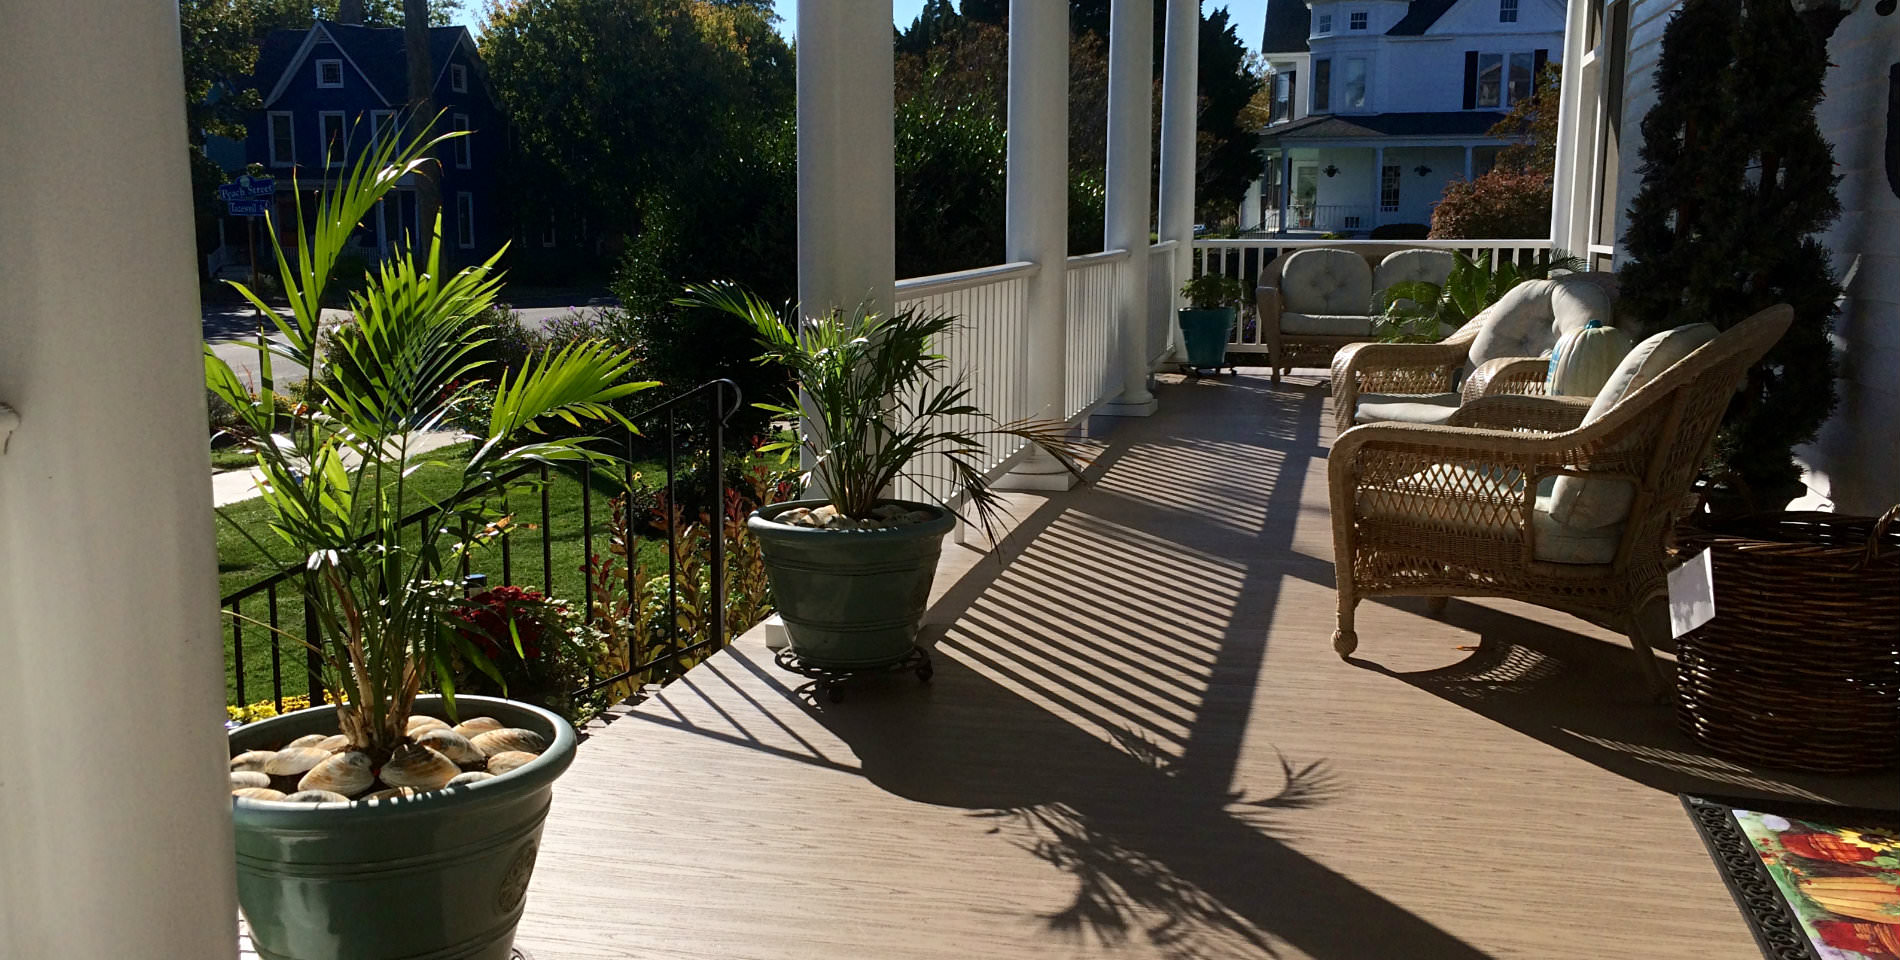 Two potted, green palms and two sitting chairs on the wooden planks of the wraparound porch.  